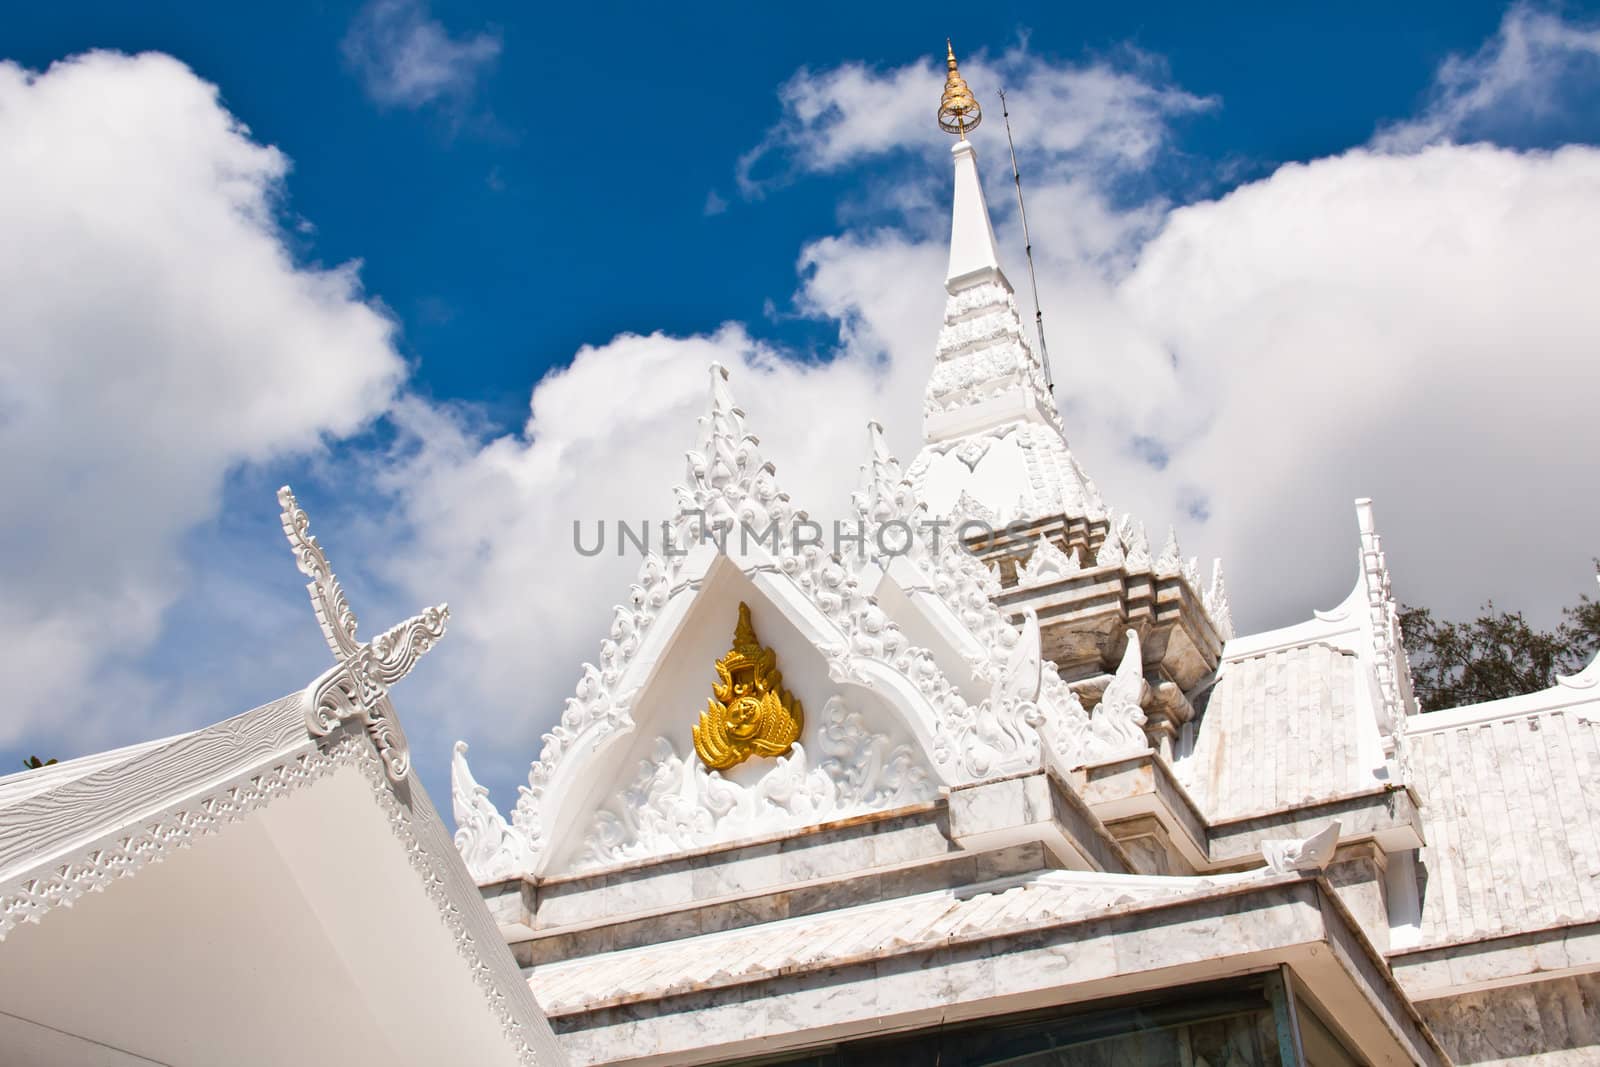 Buddhist temples in Thailand. The top of the roof is decorated with white stucco.